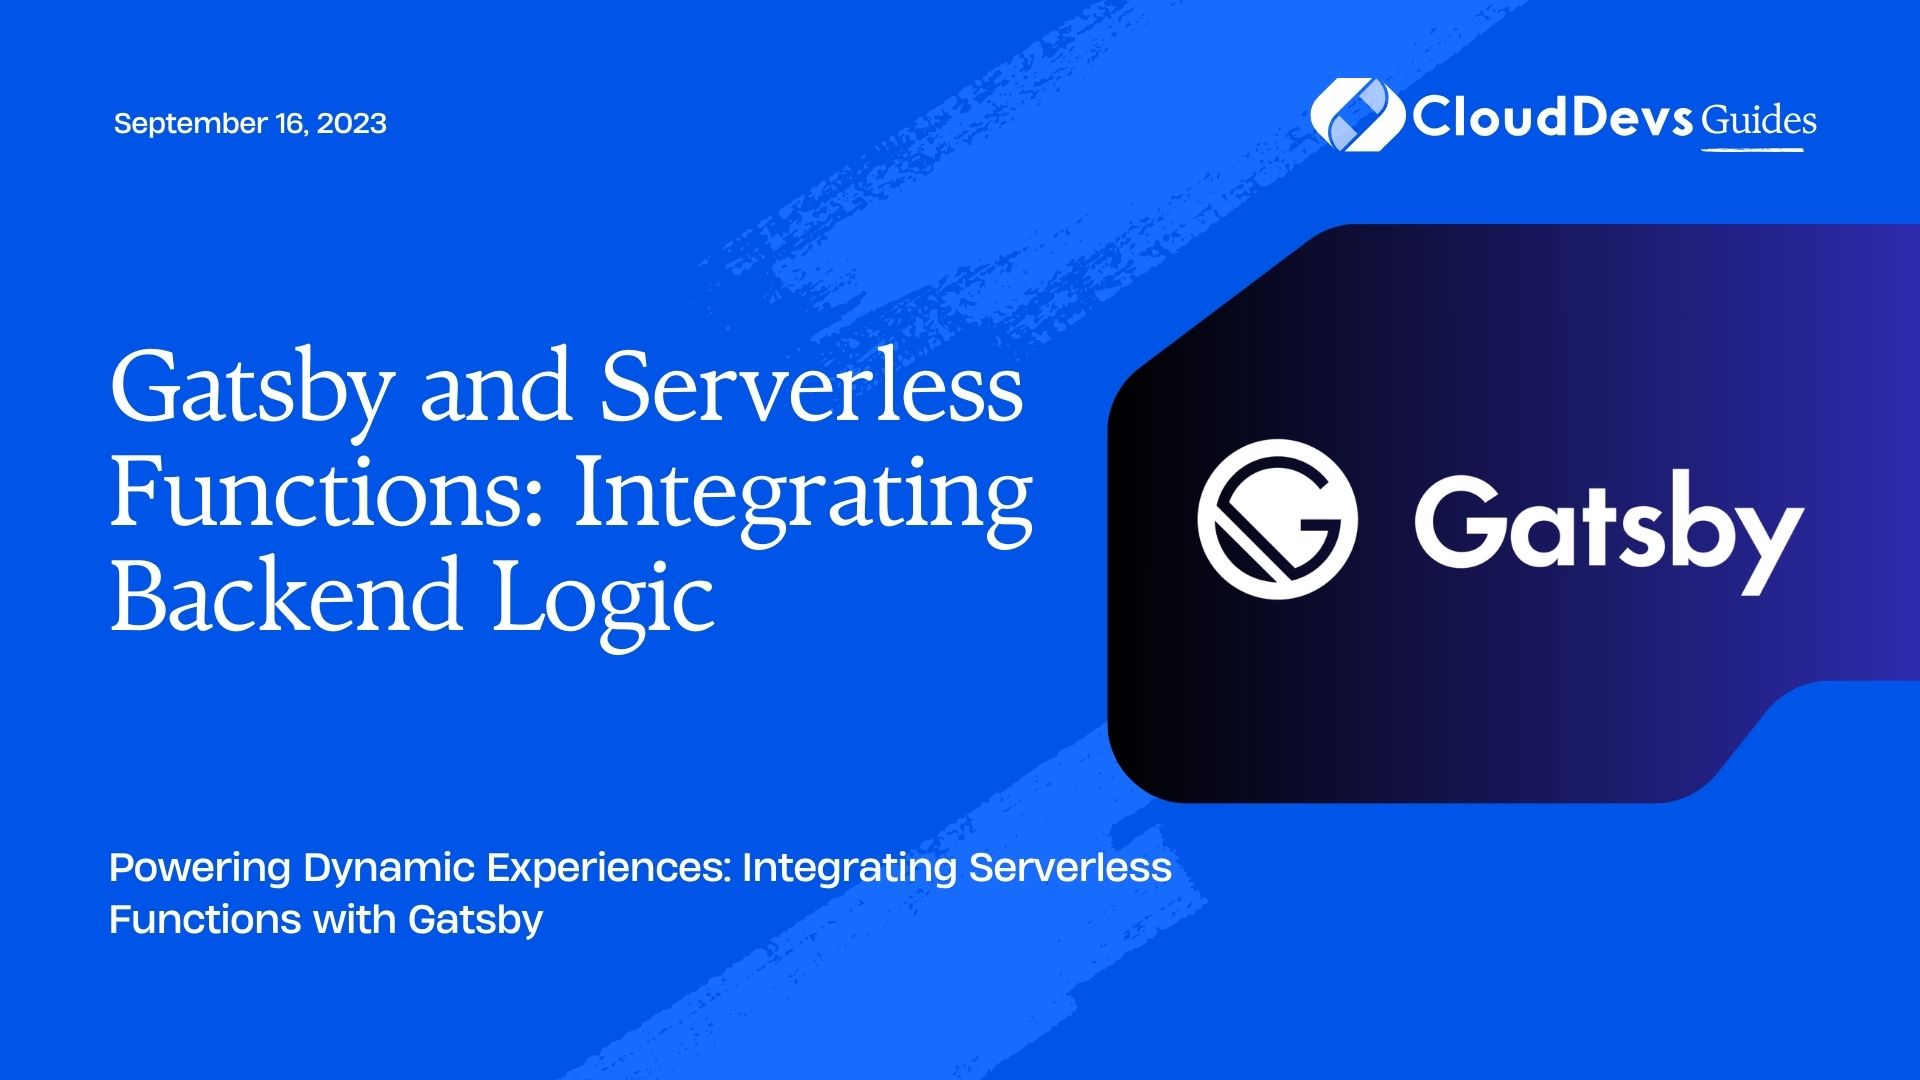 Gatsby and Serverless Functions: Integrating Backend Logic